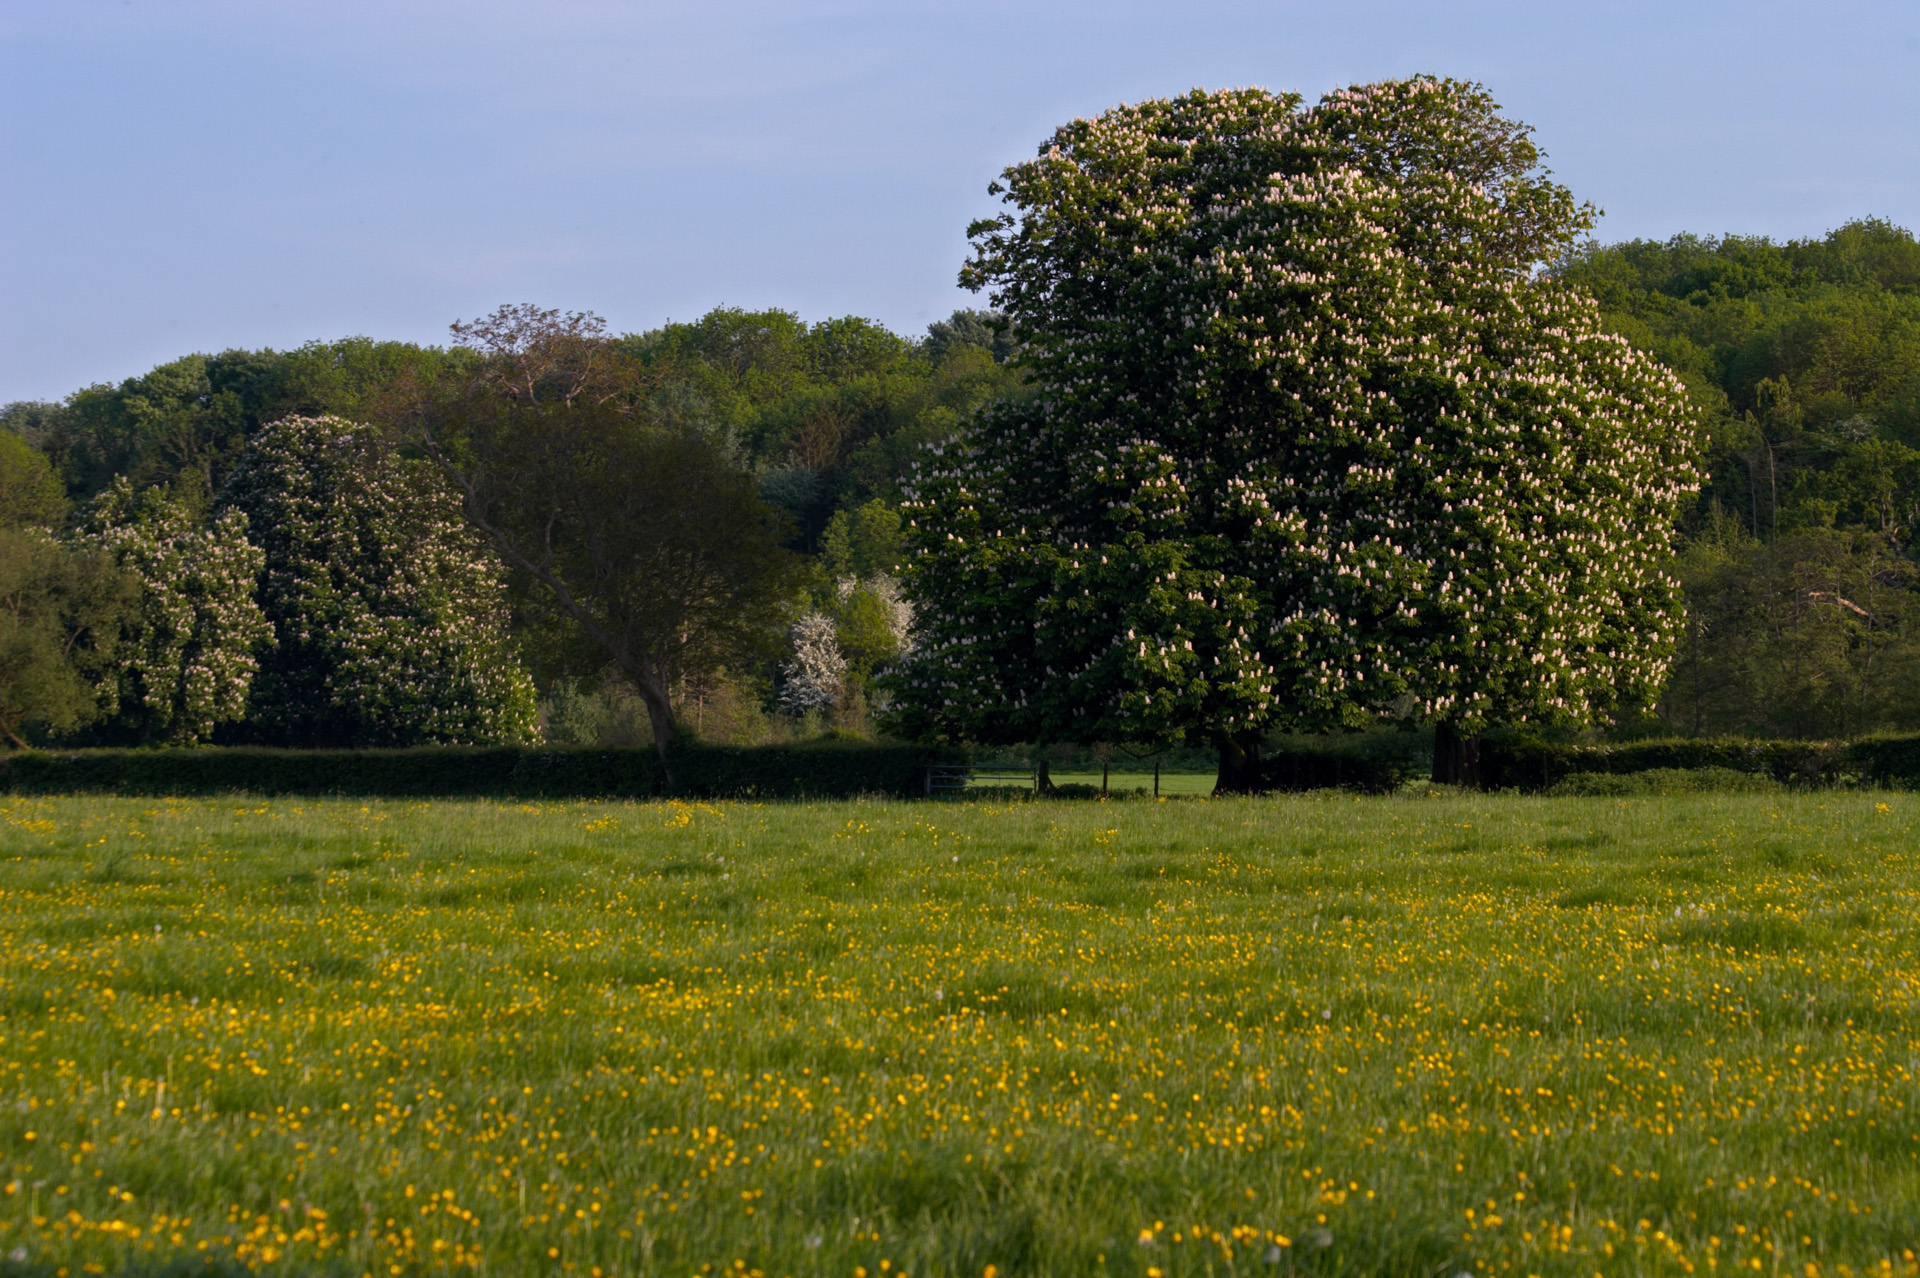 Horse Chestnut Tree in a Buttercup Meadow In Spring